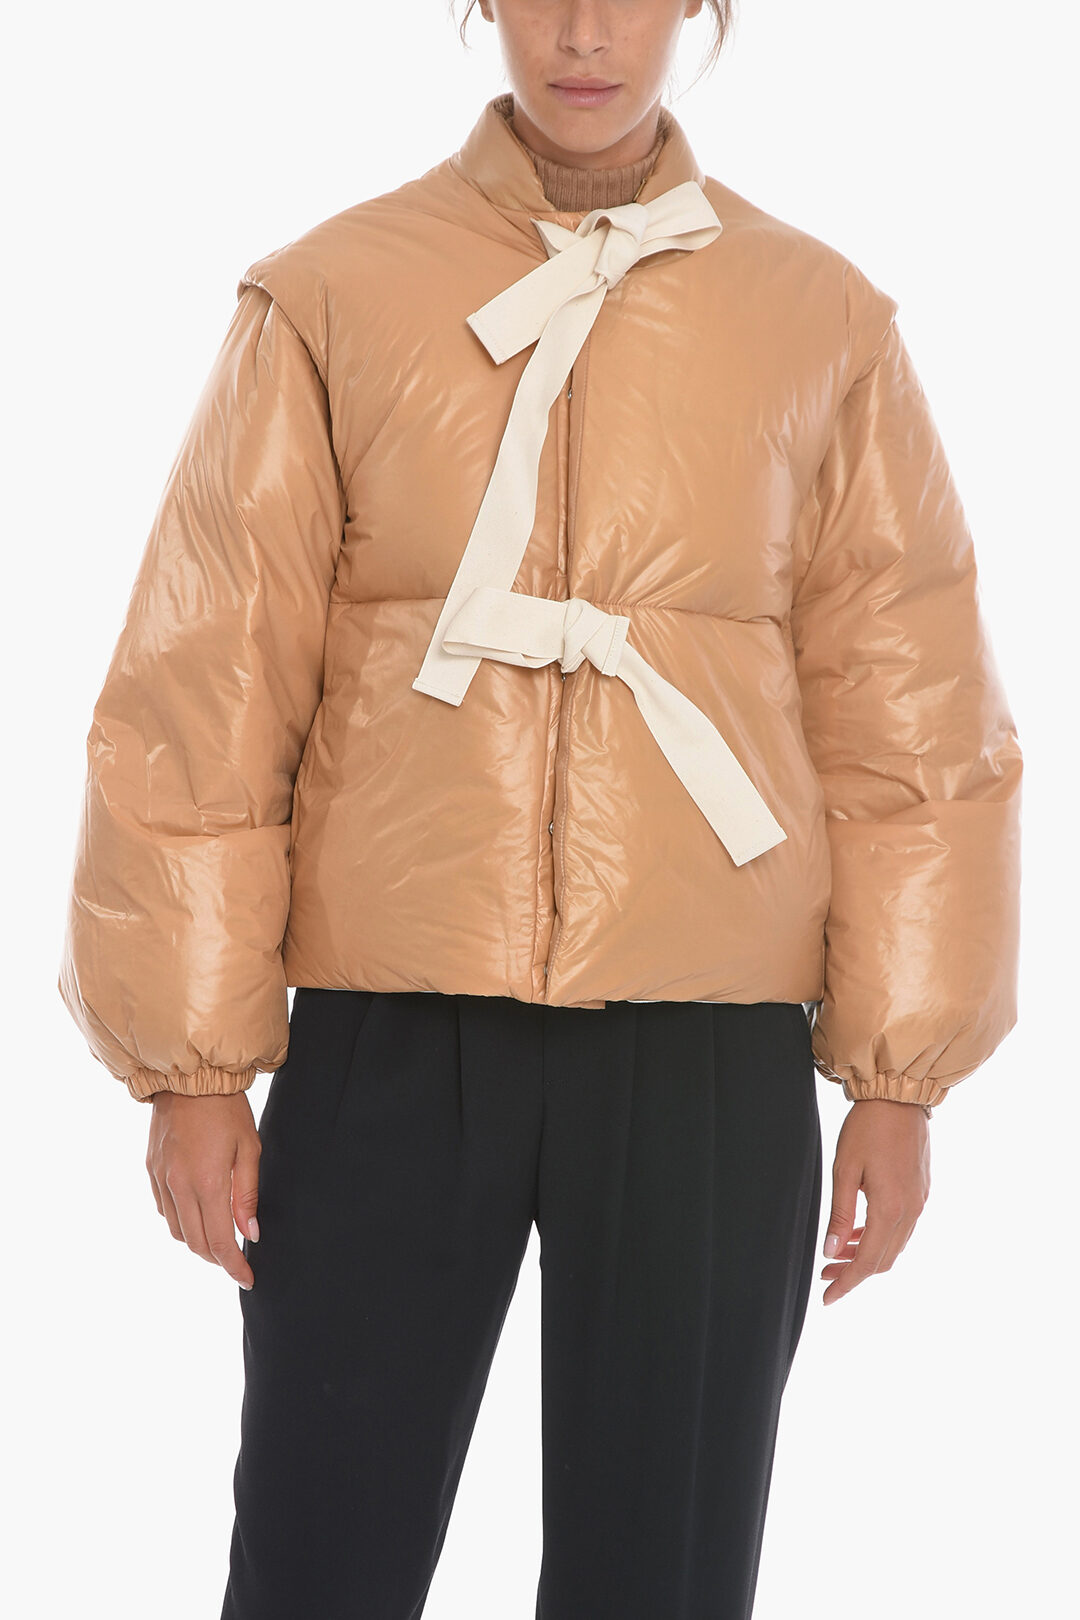 Jil Sander Cropped Puffer Jacket with Self-tie Detail women - Glamood Outlet